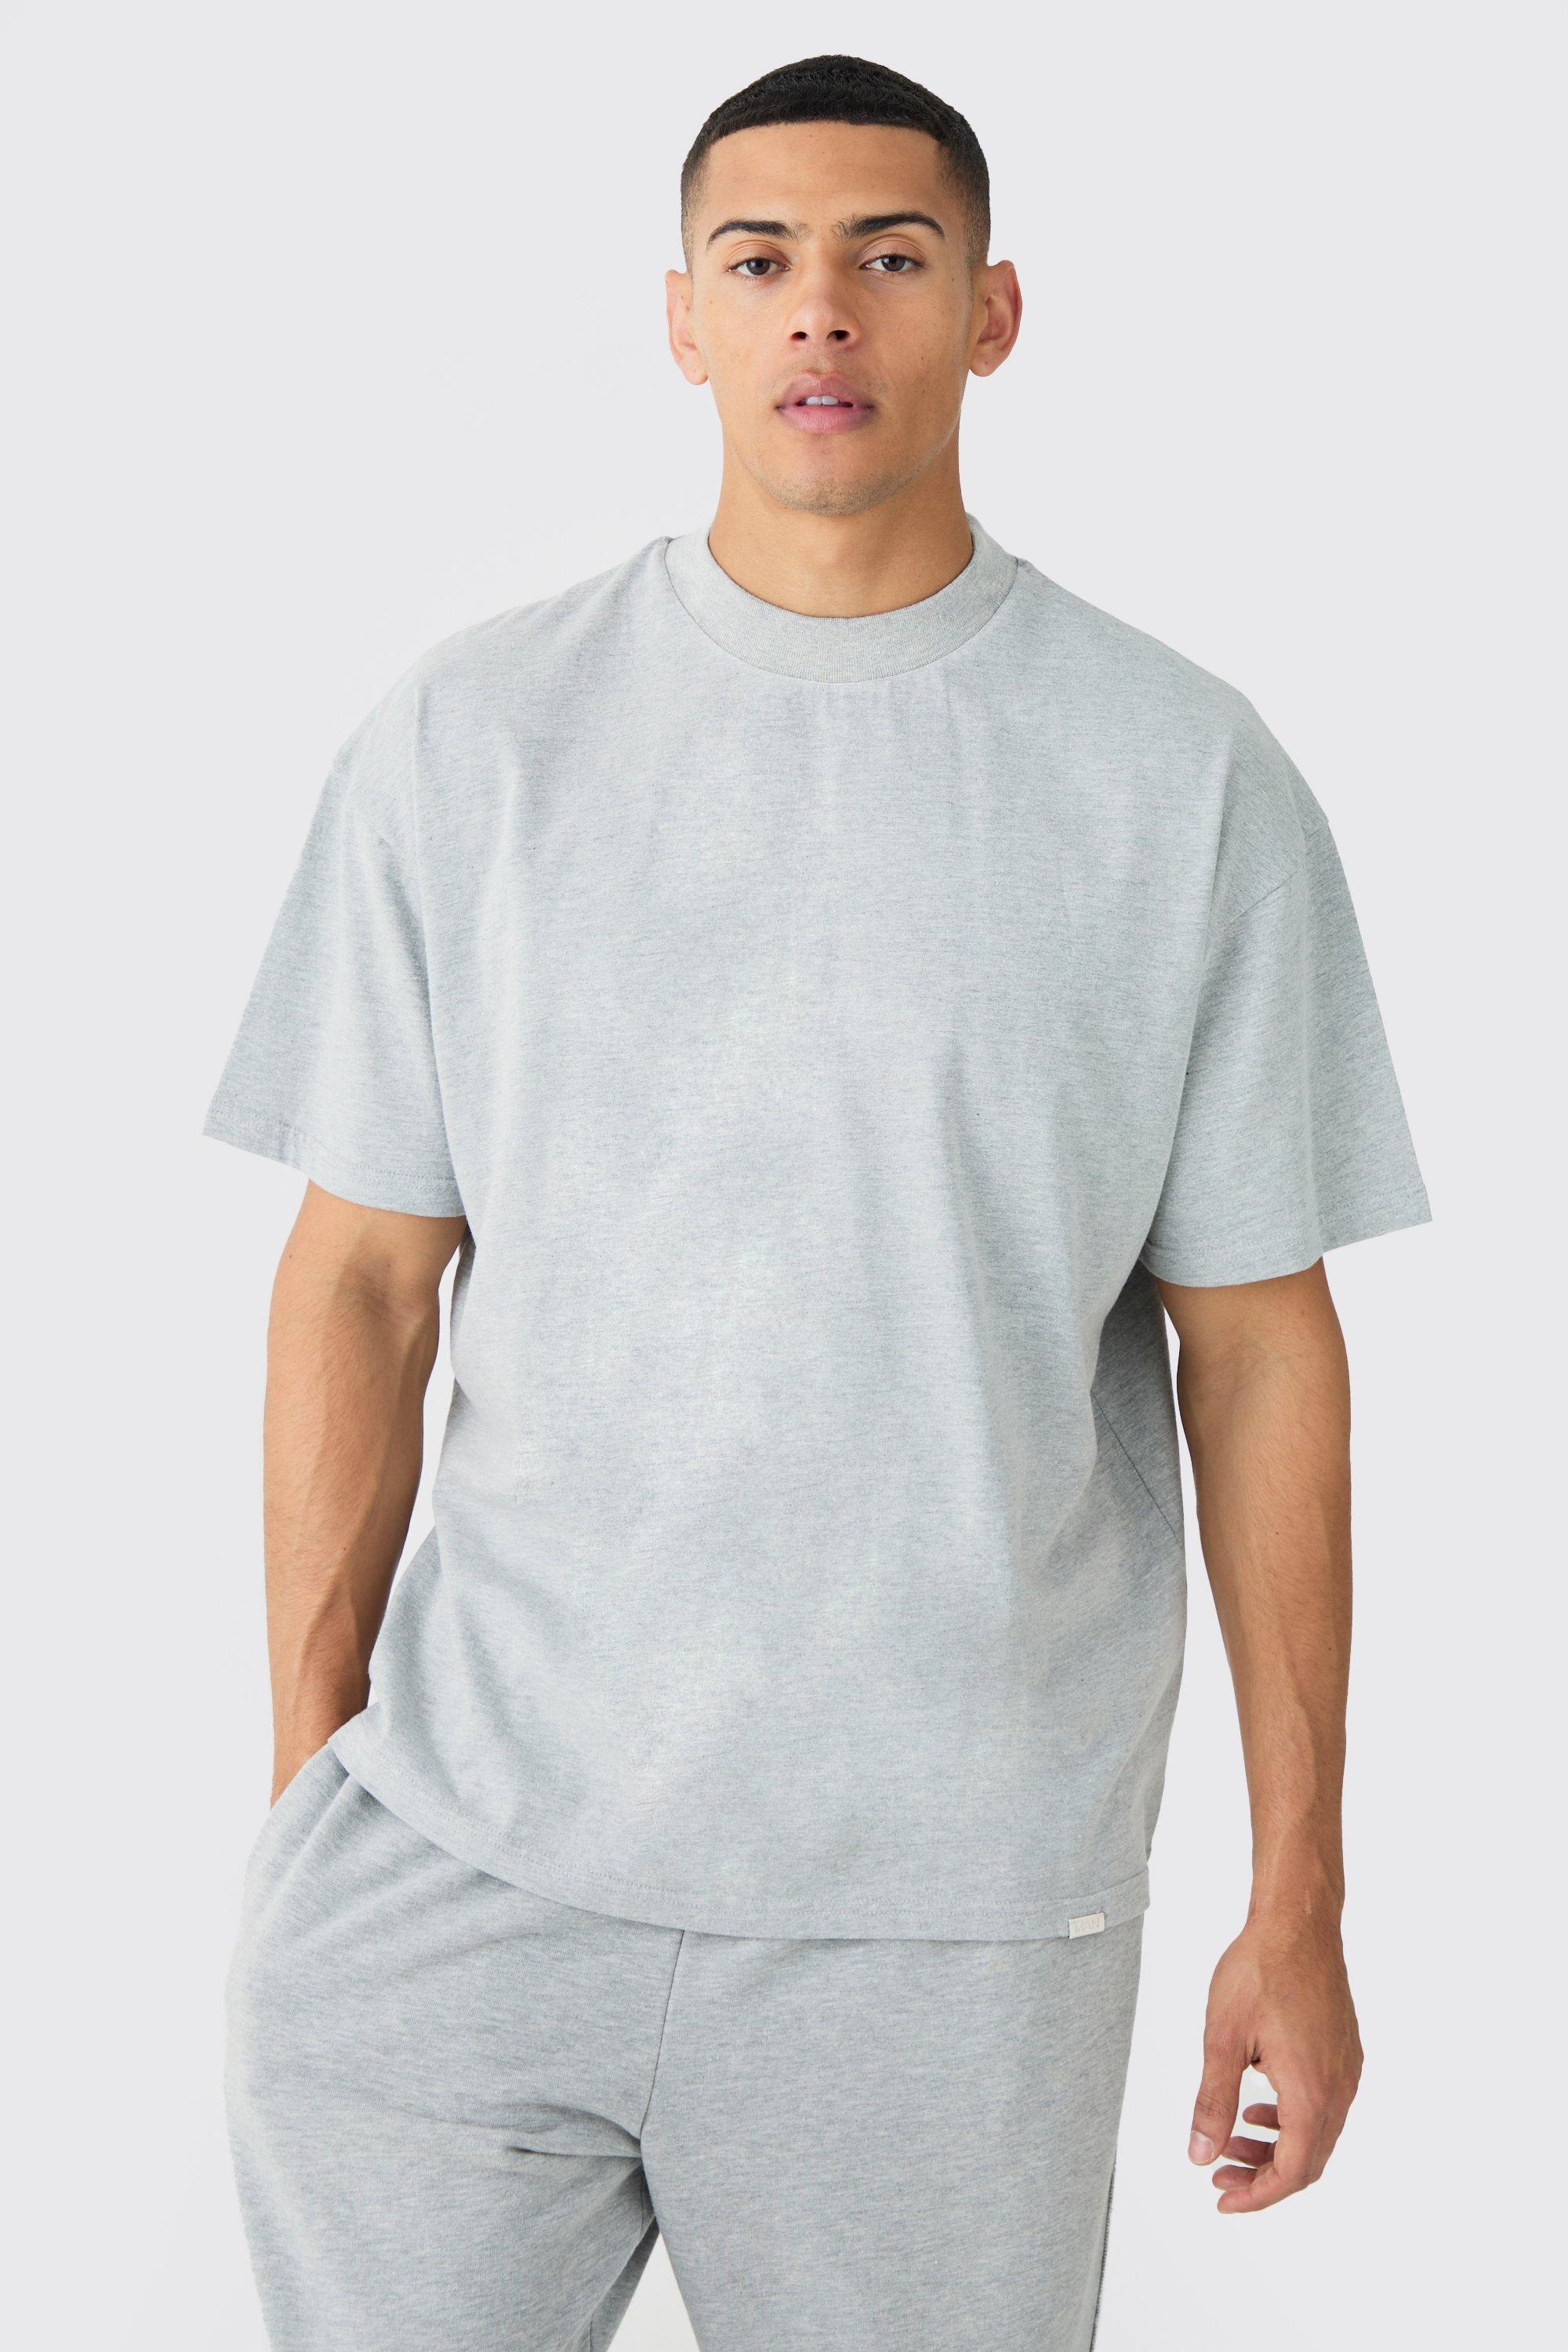 Image of Oversized Extended Neck Heavyweight T-shirt, Grigio